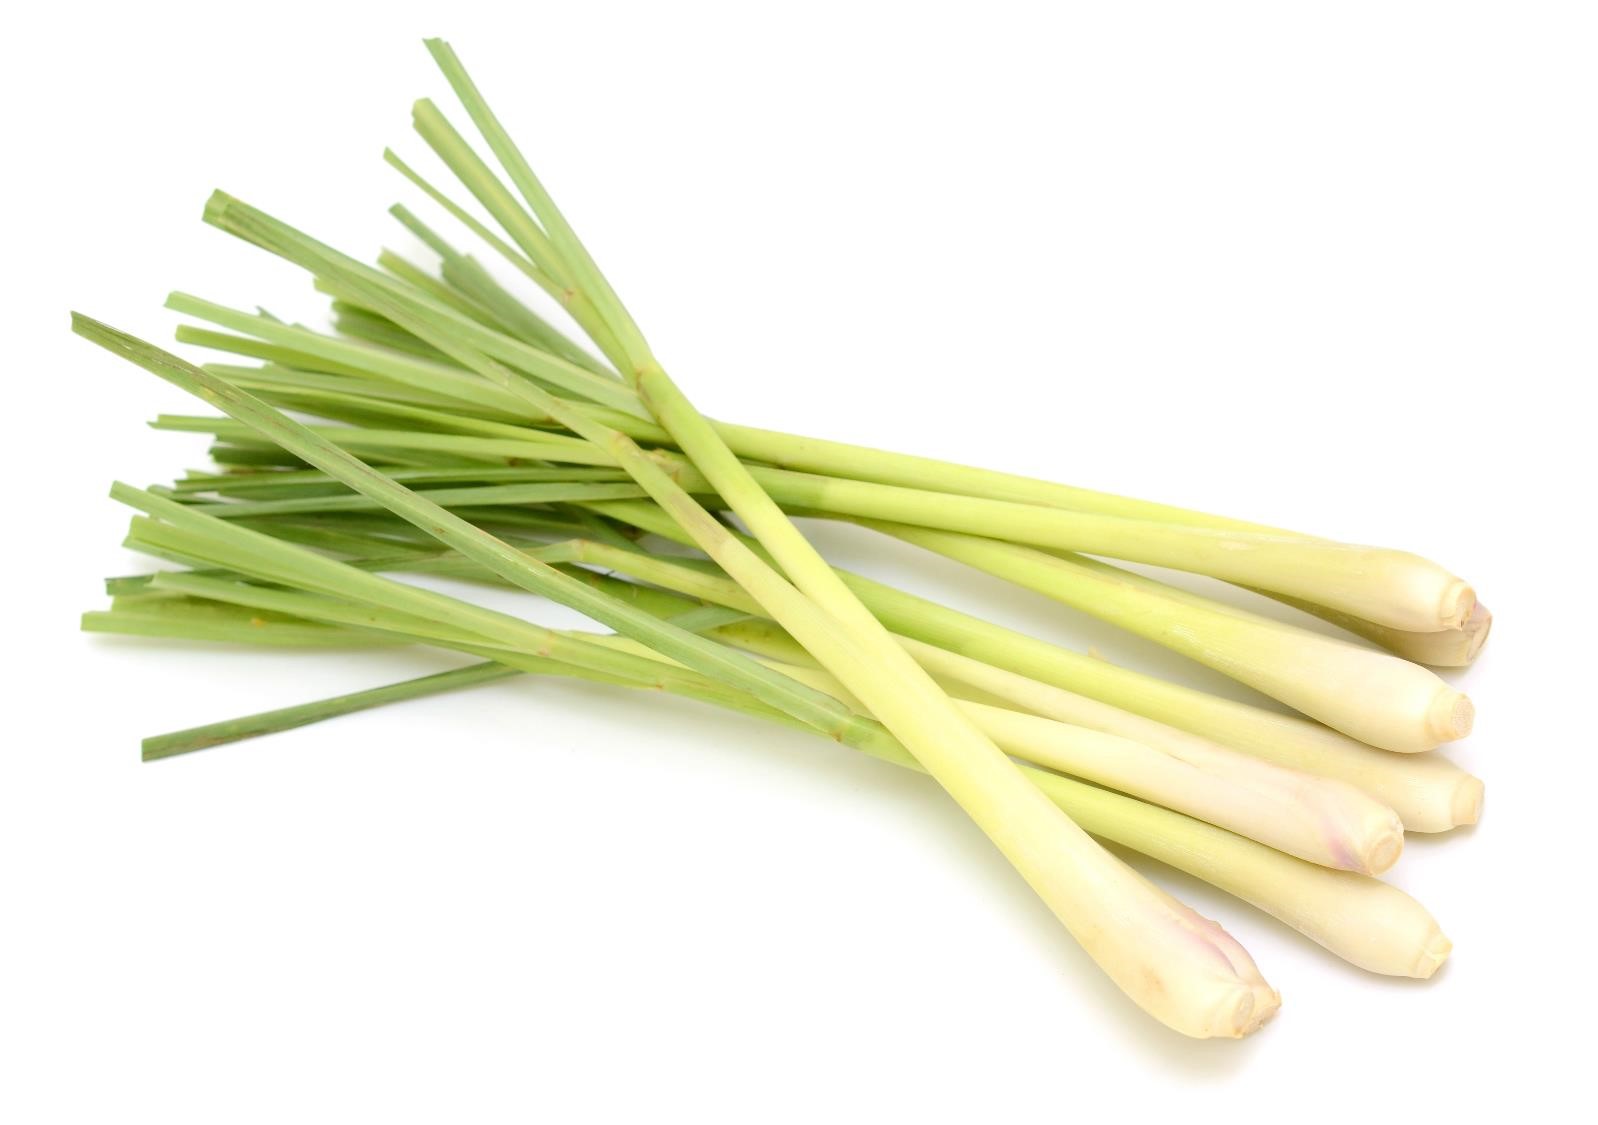 FIND OUT MORE ABOUT LEMONGRASS